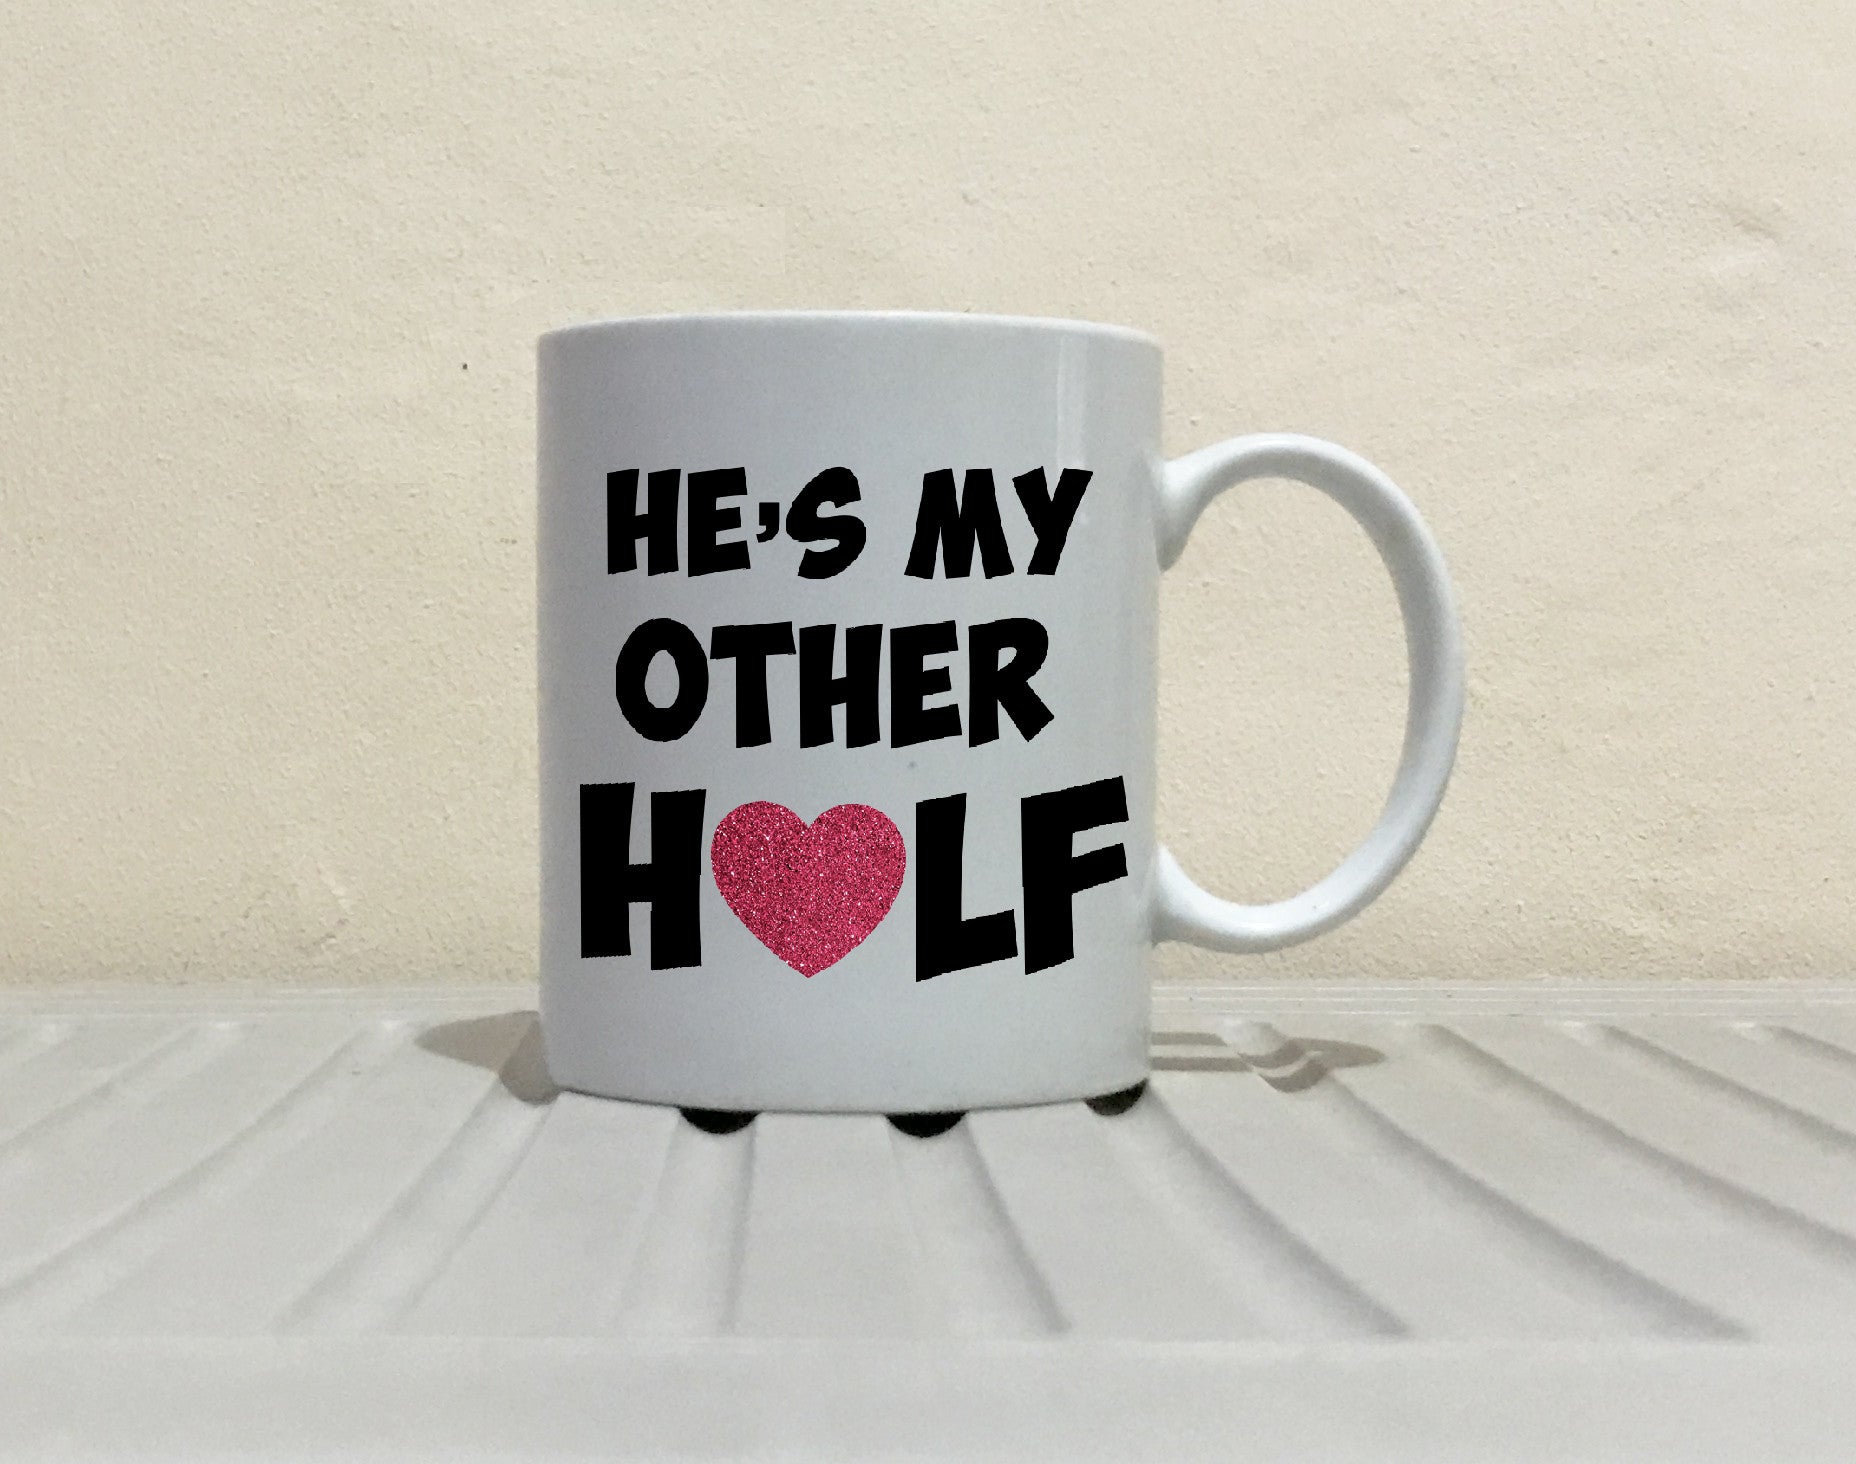 husband and wife cups